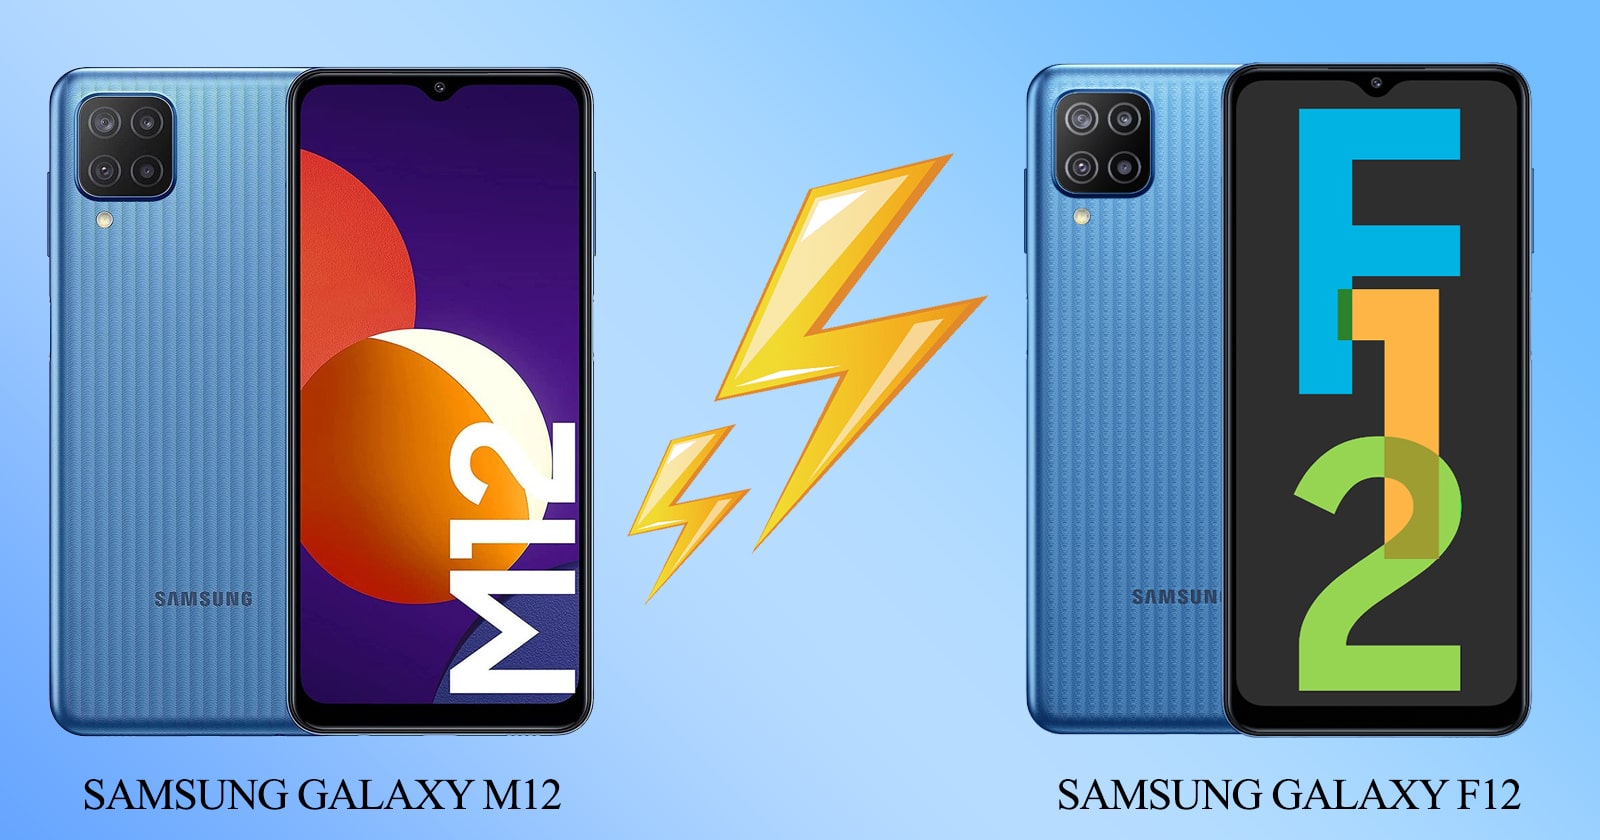 What Is the Difference Between Samsung Galaxy M12 and F12